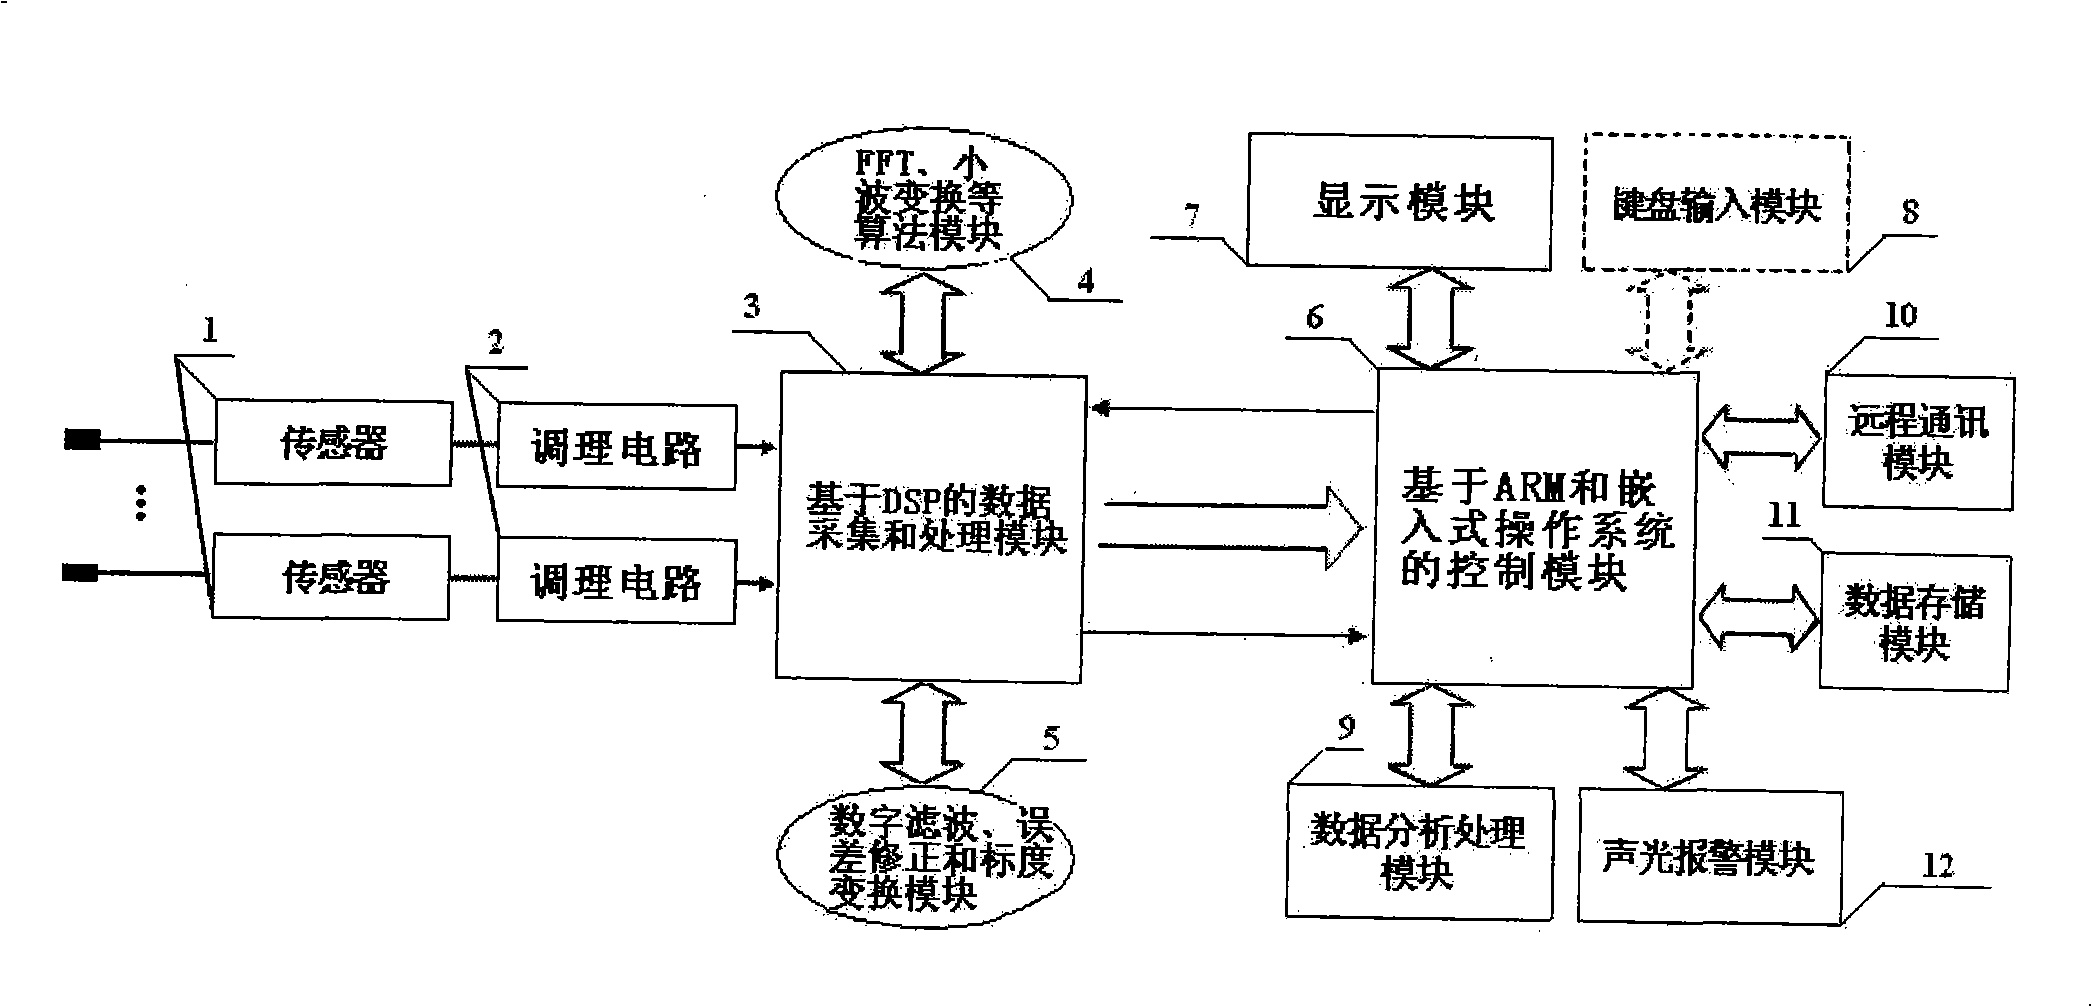 Electrical data capturing and processing method